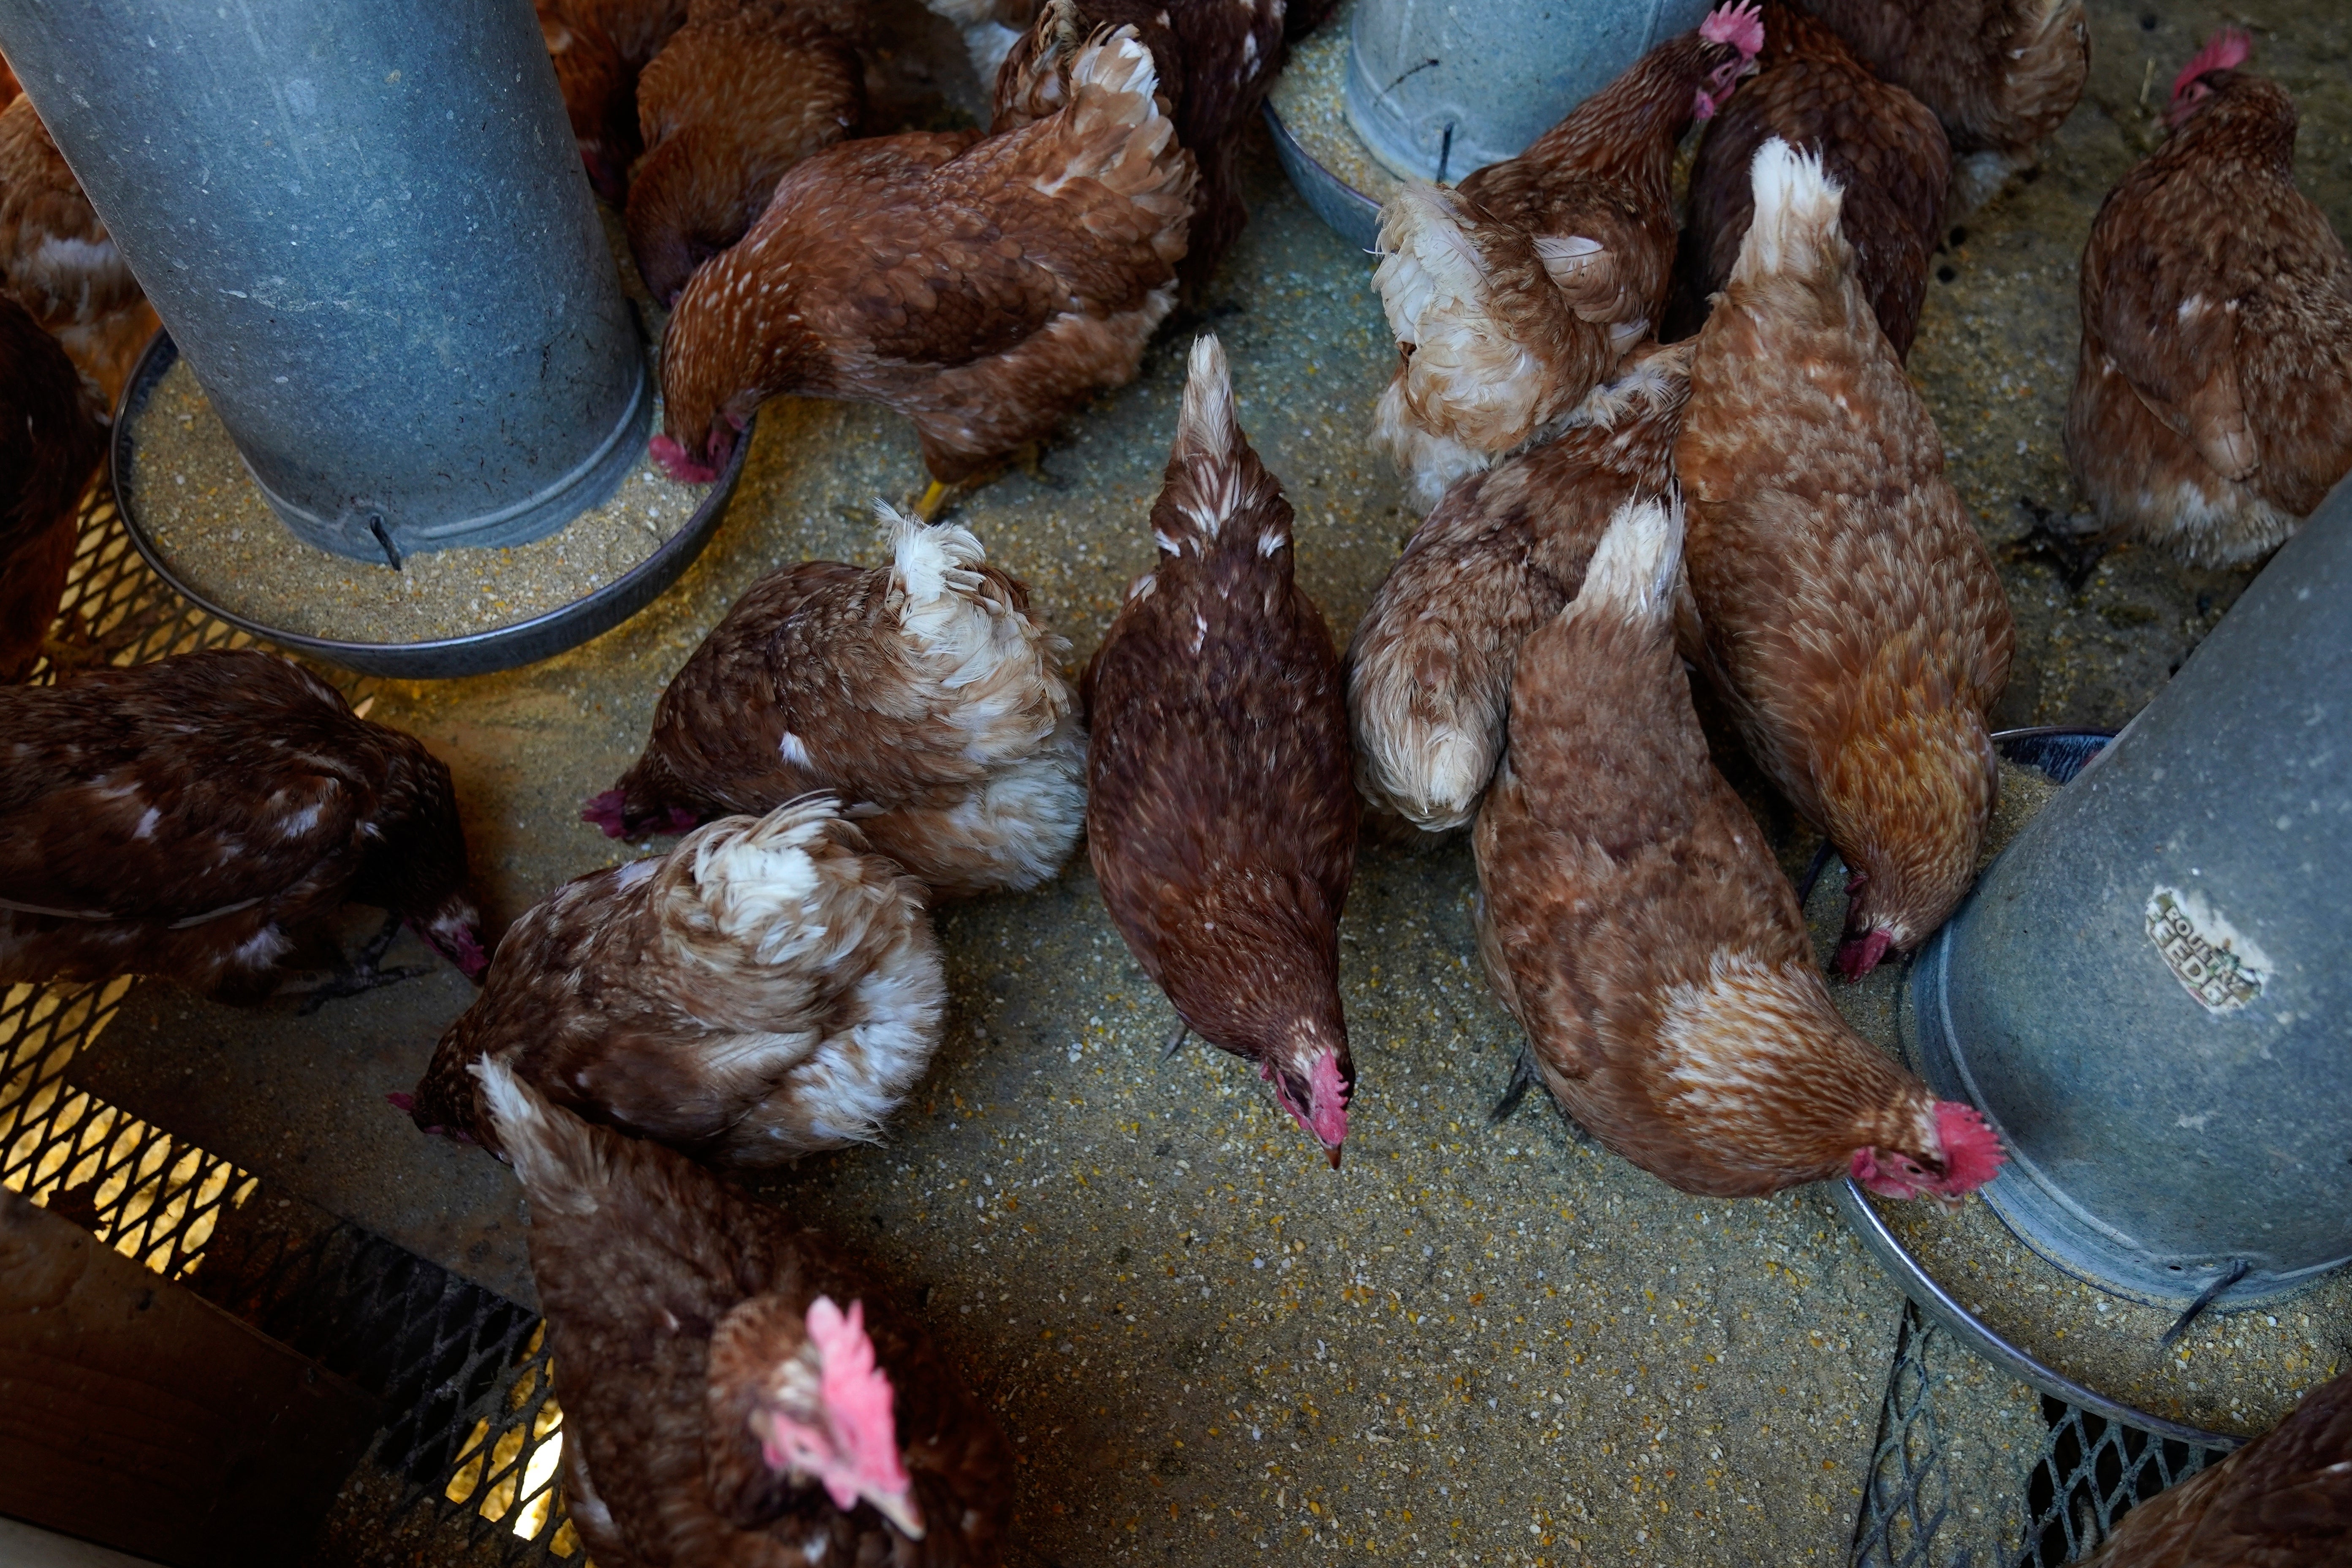 Millions of birds with avian flu have been culled in the past 20 years